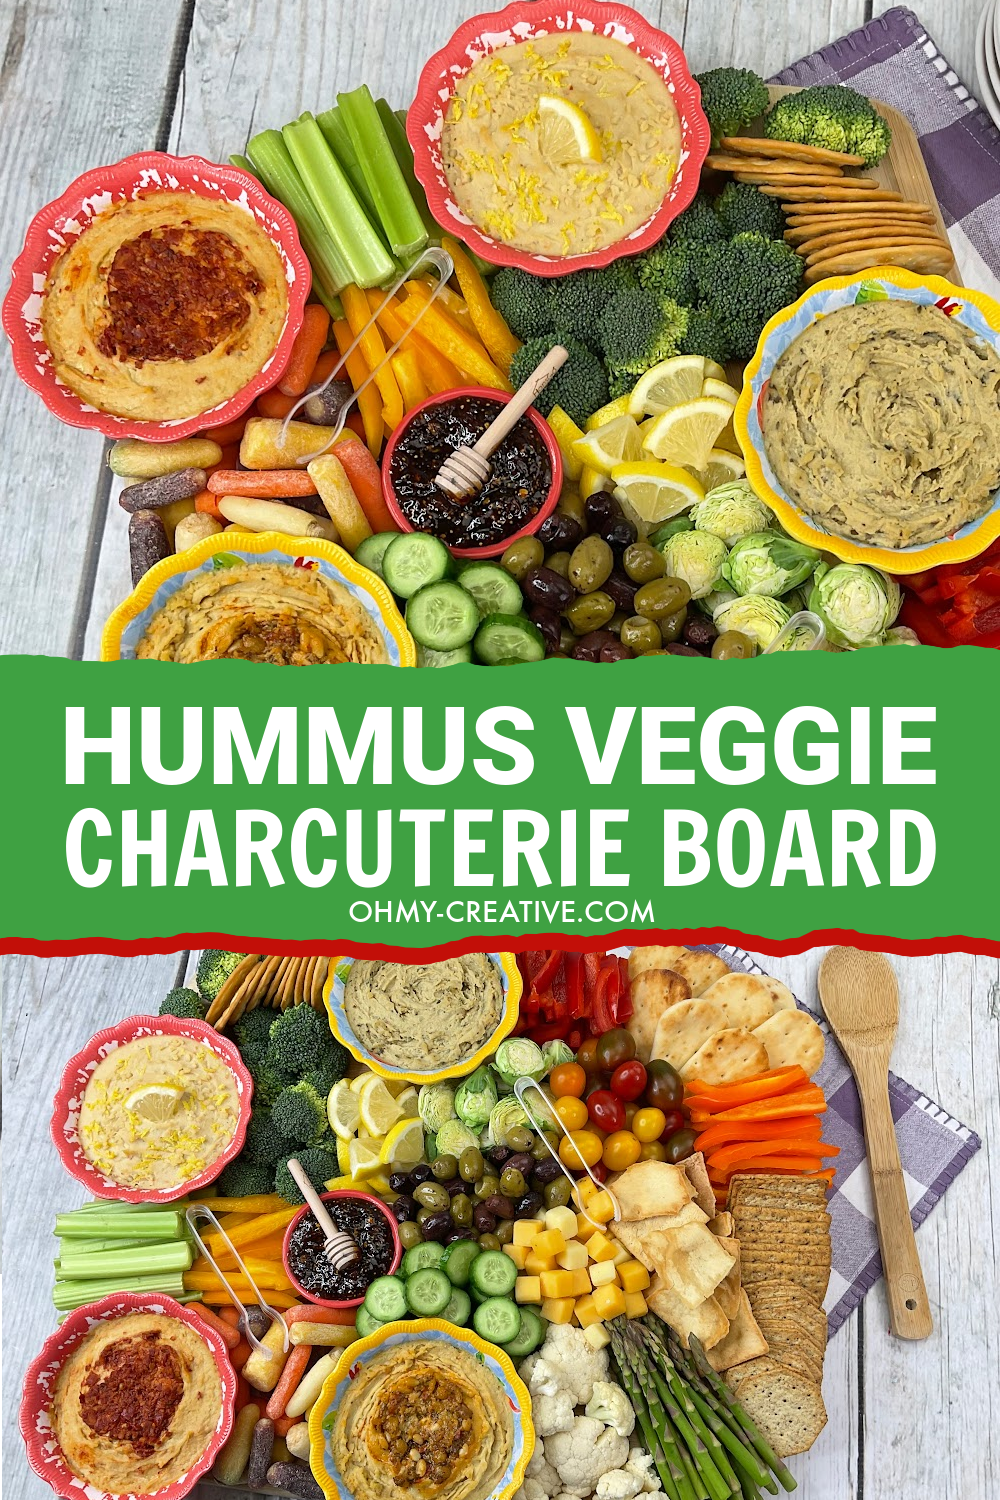 A healthy vegetable veggie charcuterie board made with fresh vegetables paired with irresistible hummus dips.